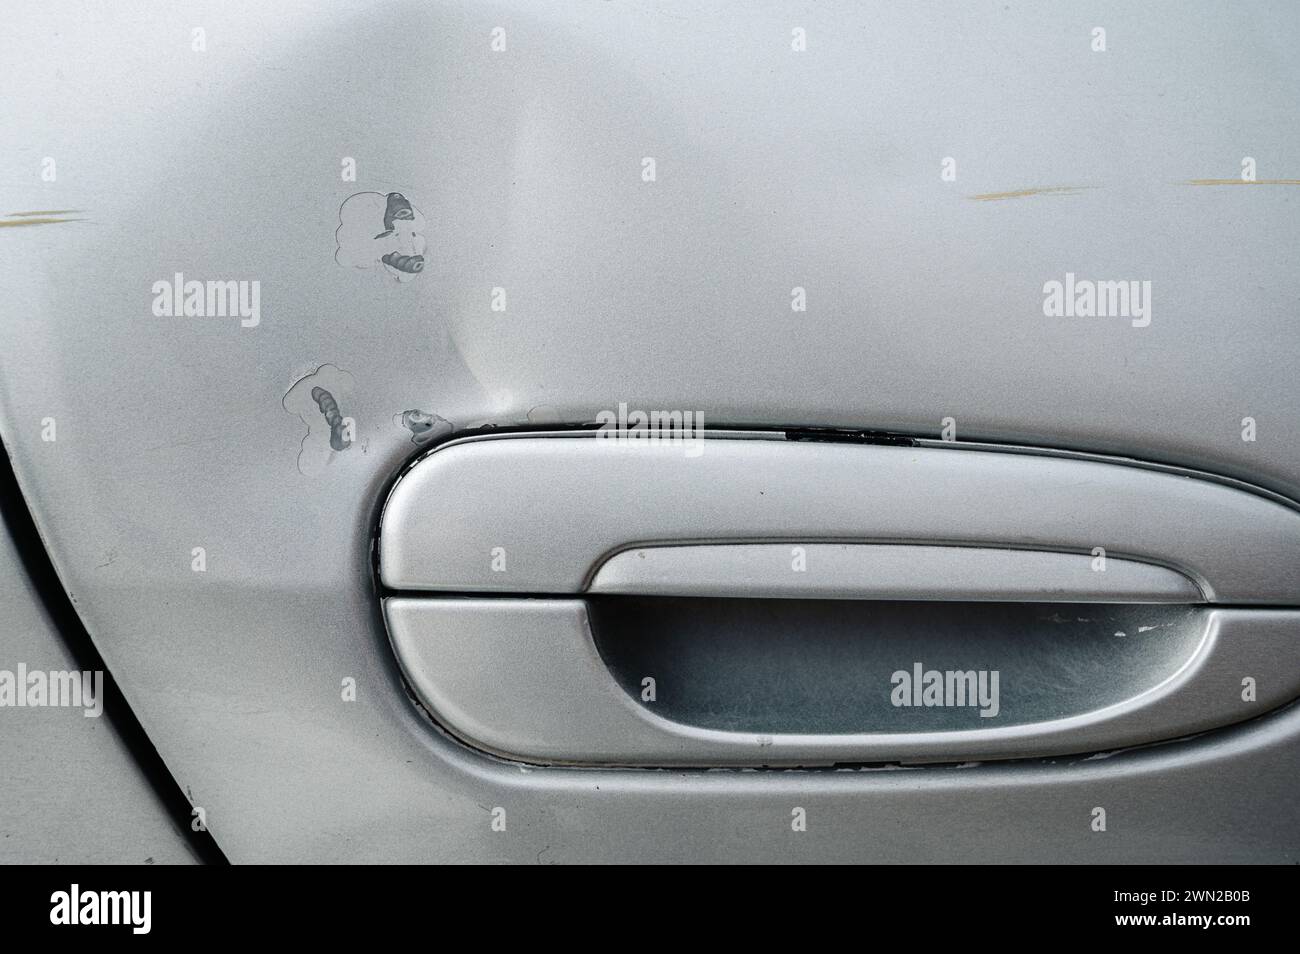 car after an accident with a damaged dented and scratched door on the side close-up Stock Photo